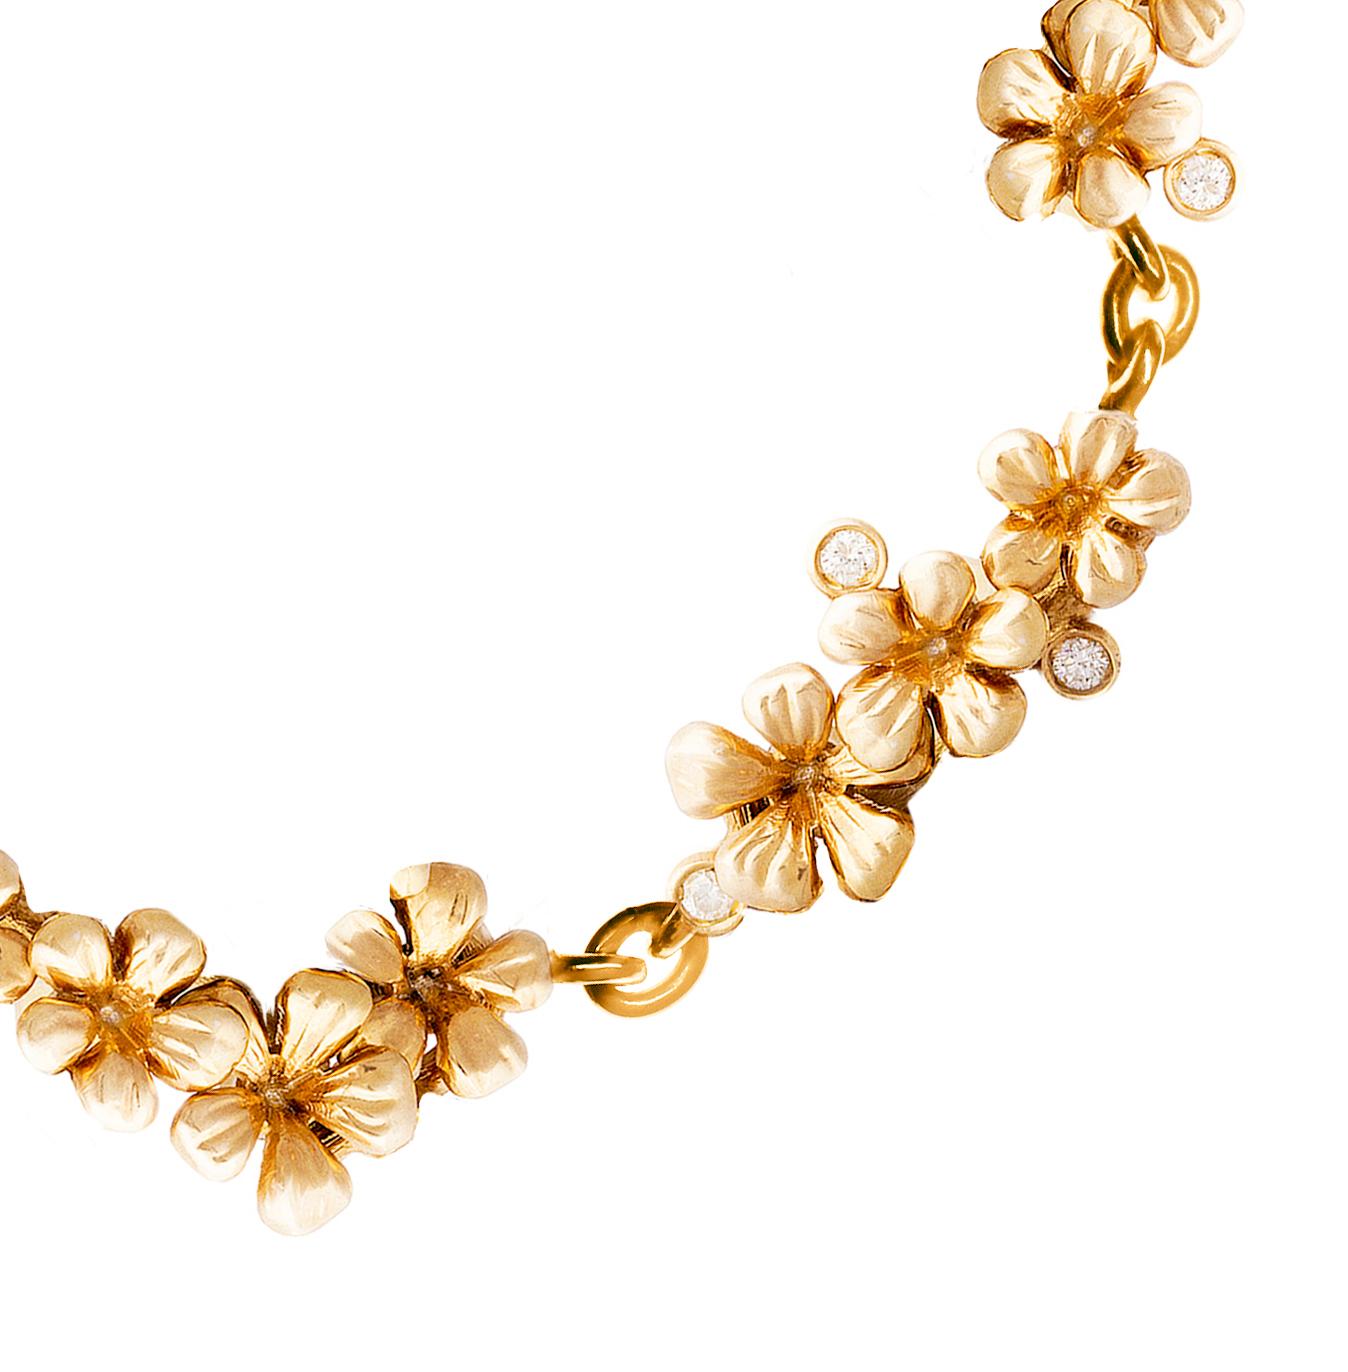 Women's Plum Blossom Contemporary Bracelet in Rose Gold with Diamonds by Artist For Sale